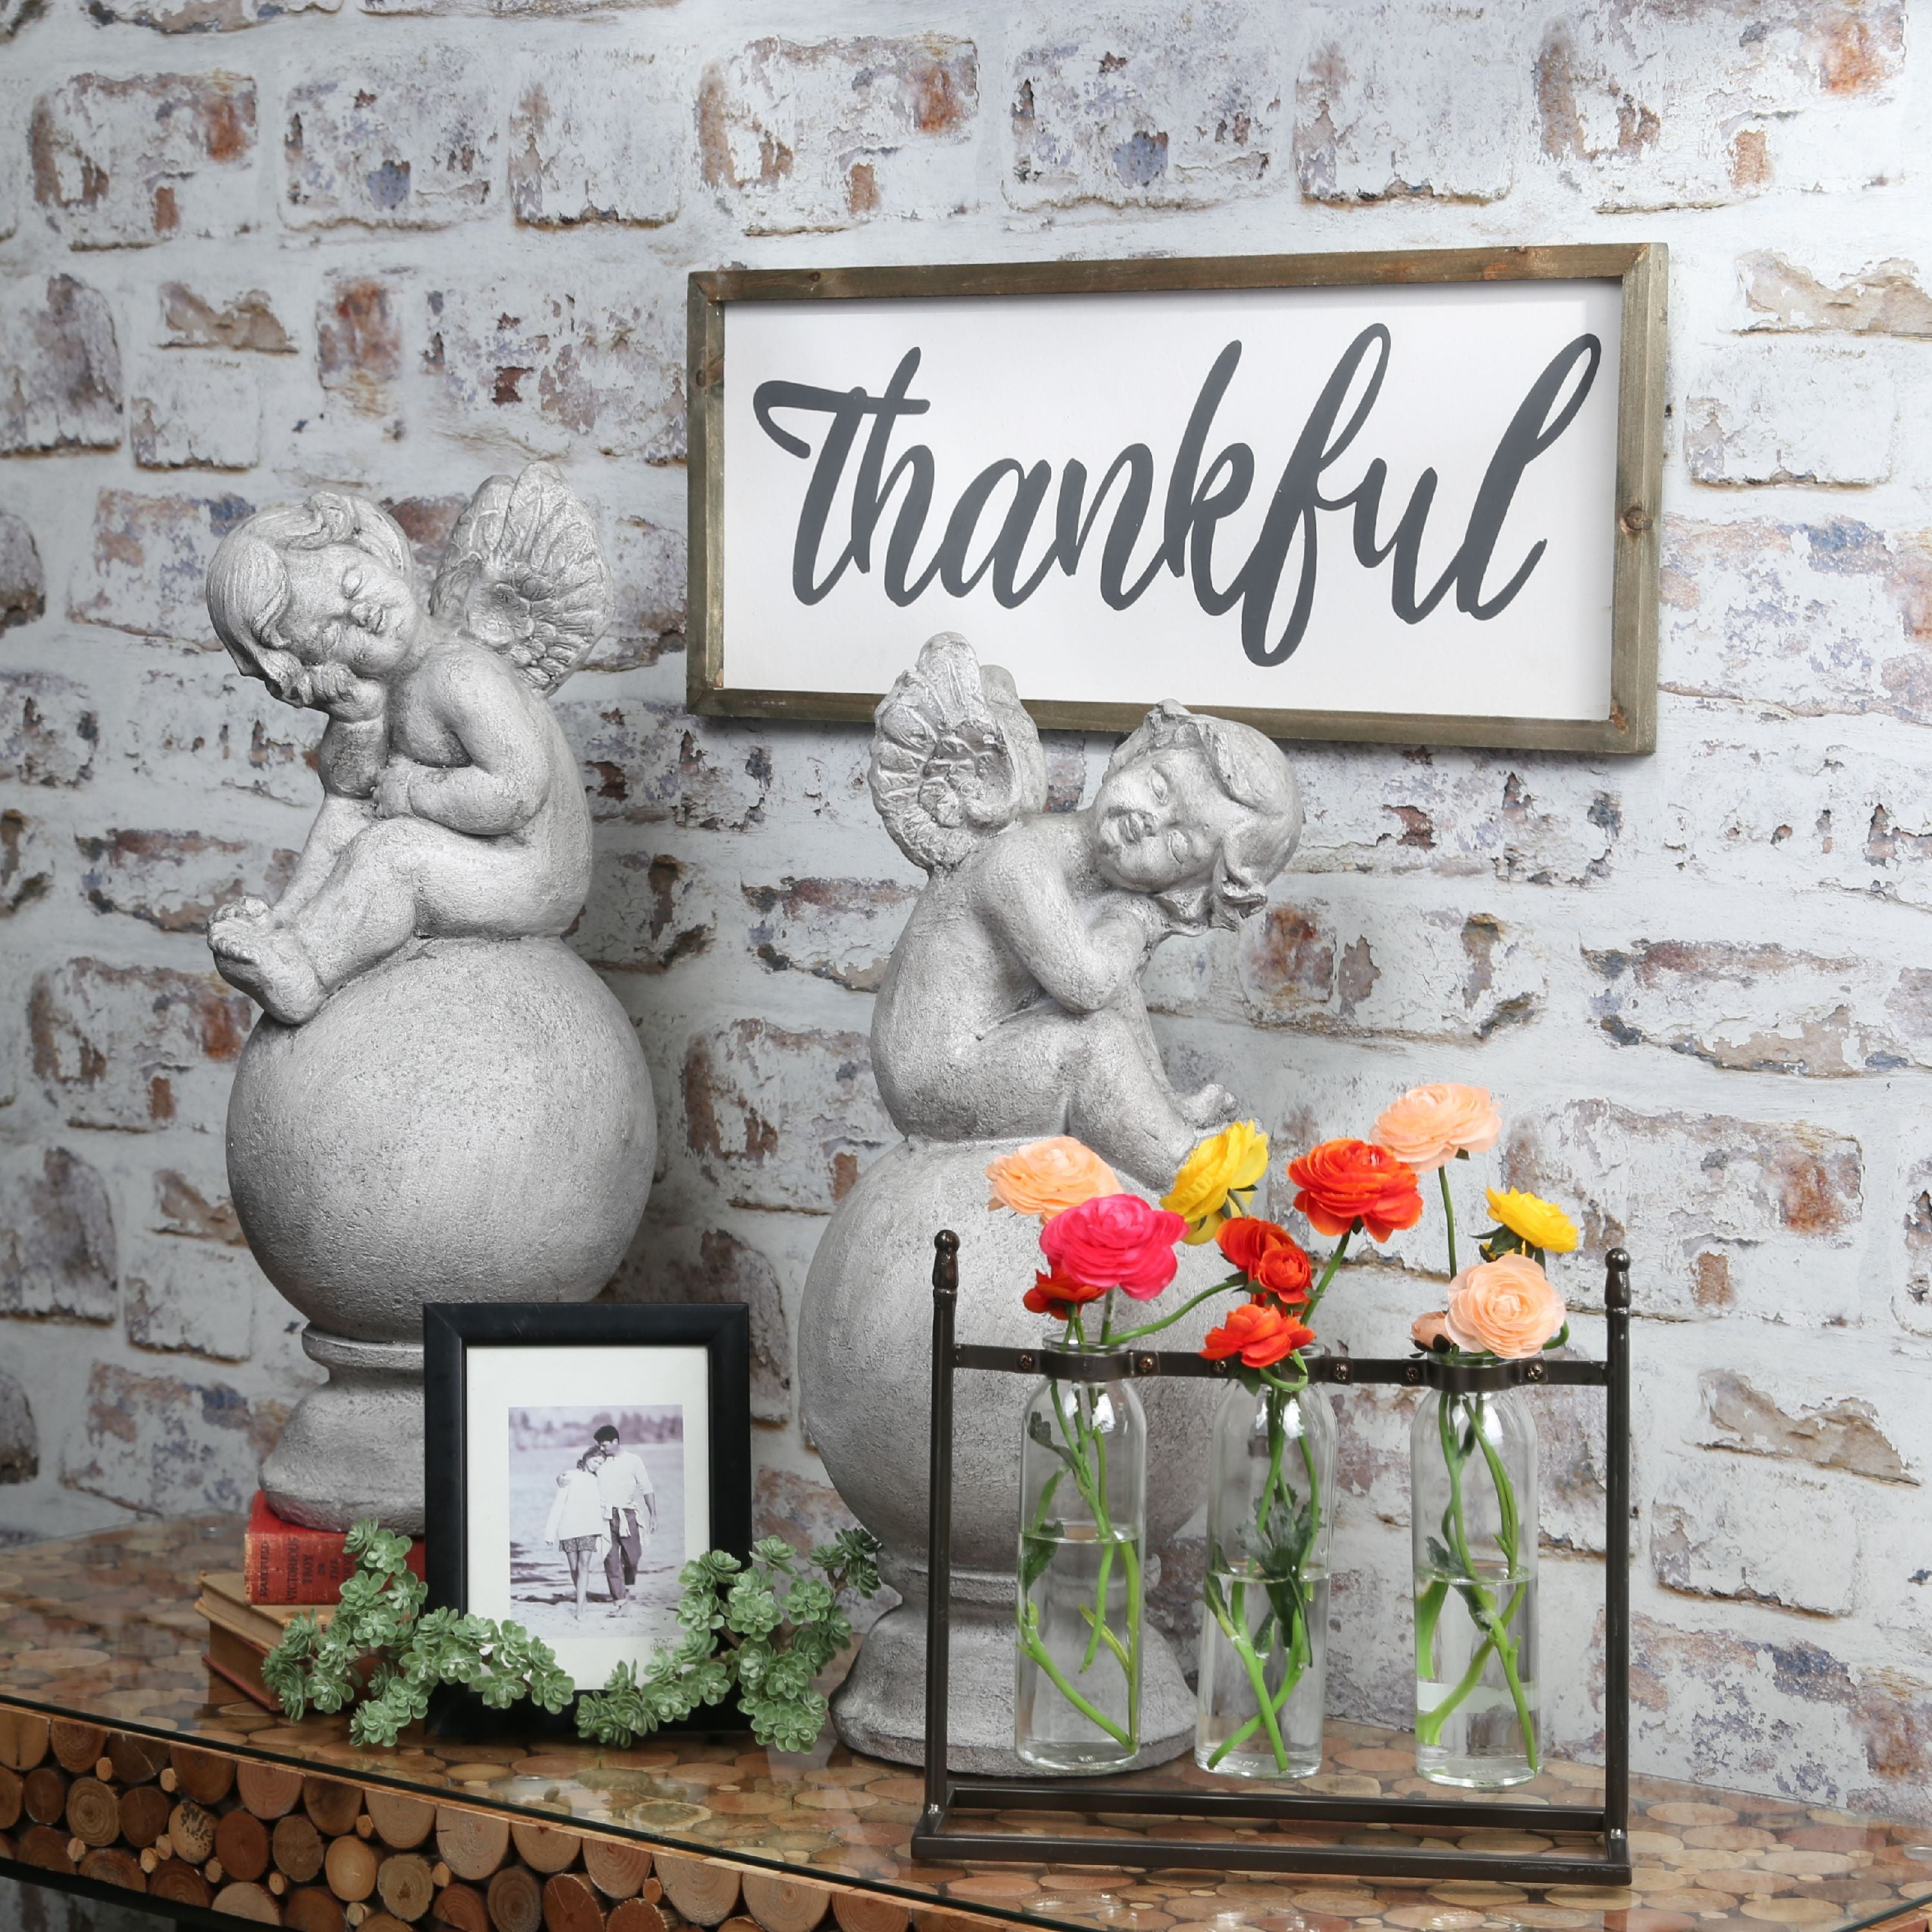 Urban Trend Urban Wood Rectangle Wall Art with Cursive Writing "THANKFUL" on Sage Color Frame and Metal Back Hangers Painted Finish White